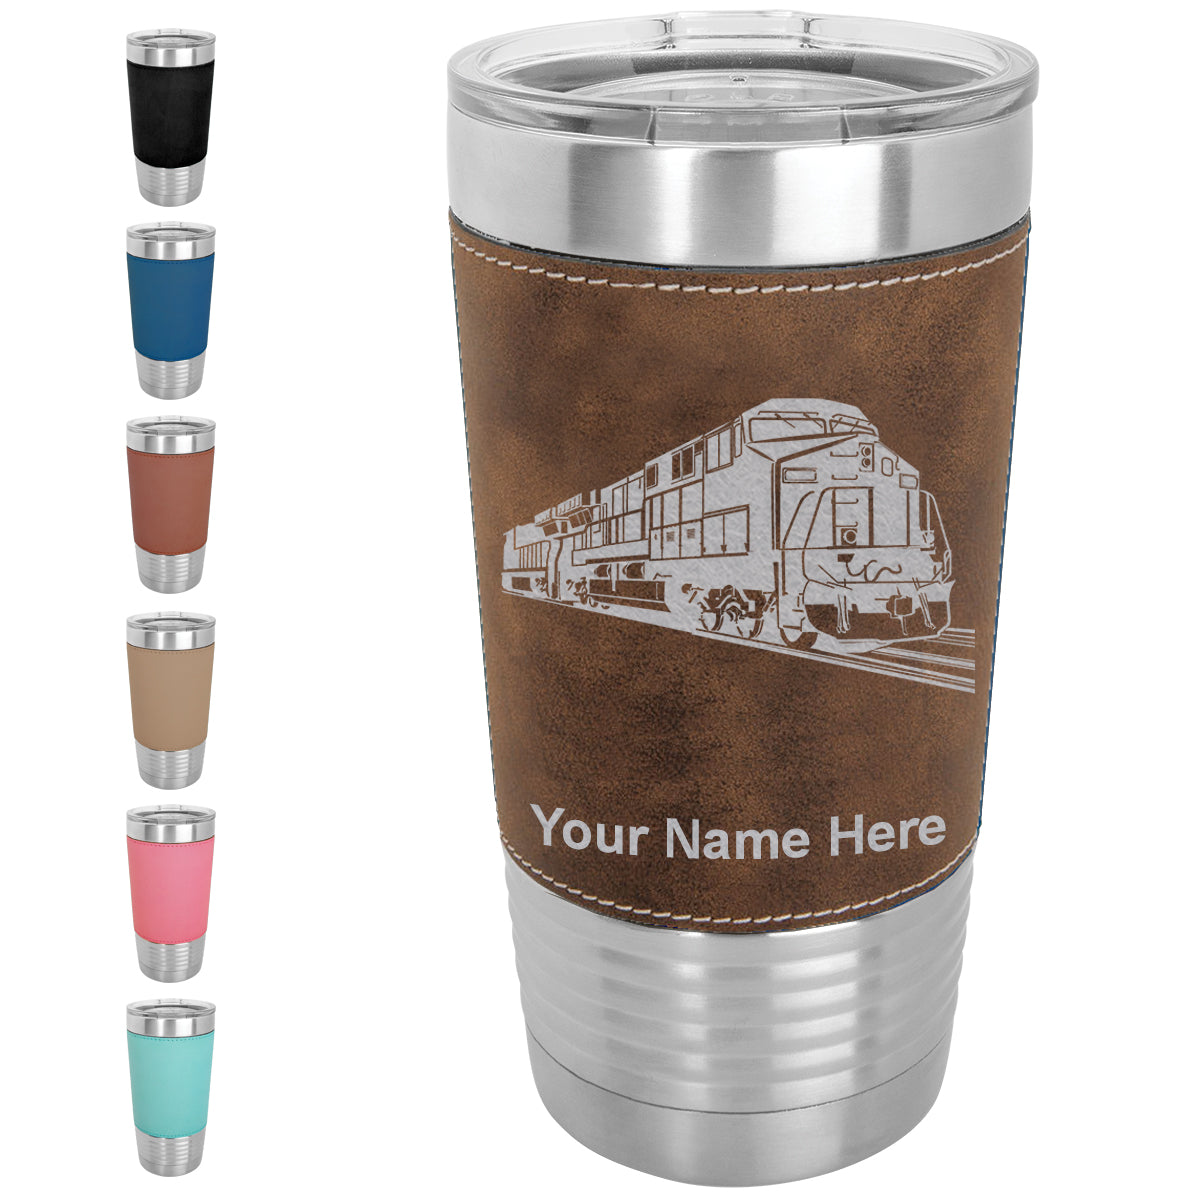 20oz Faux Leather Tumbler Mug, Freight Train, Personalized Engraving Included - LaserGram Custom Engraved Gifts